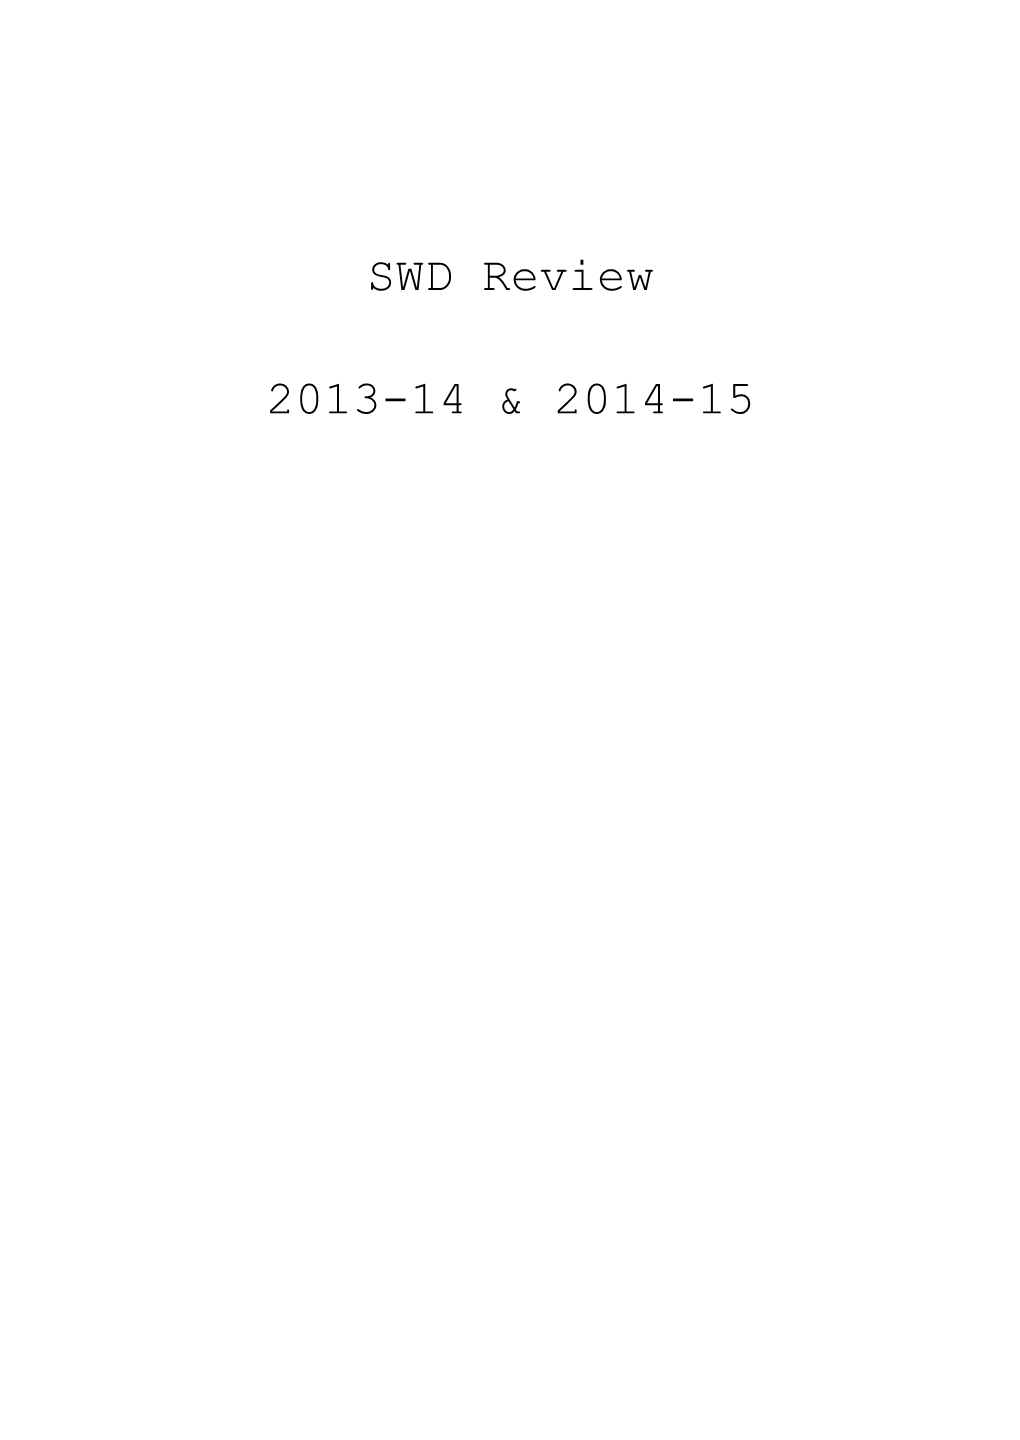 SWD Review 2013-14 & 2014-15